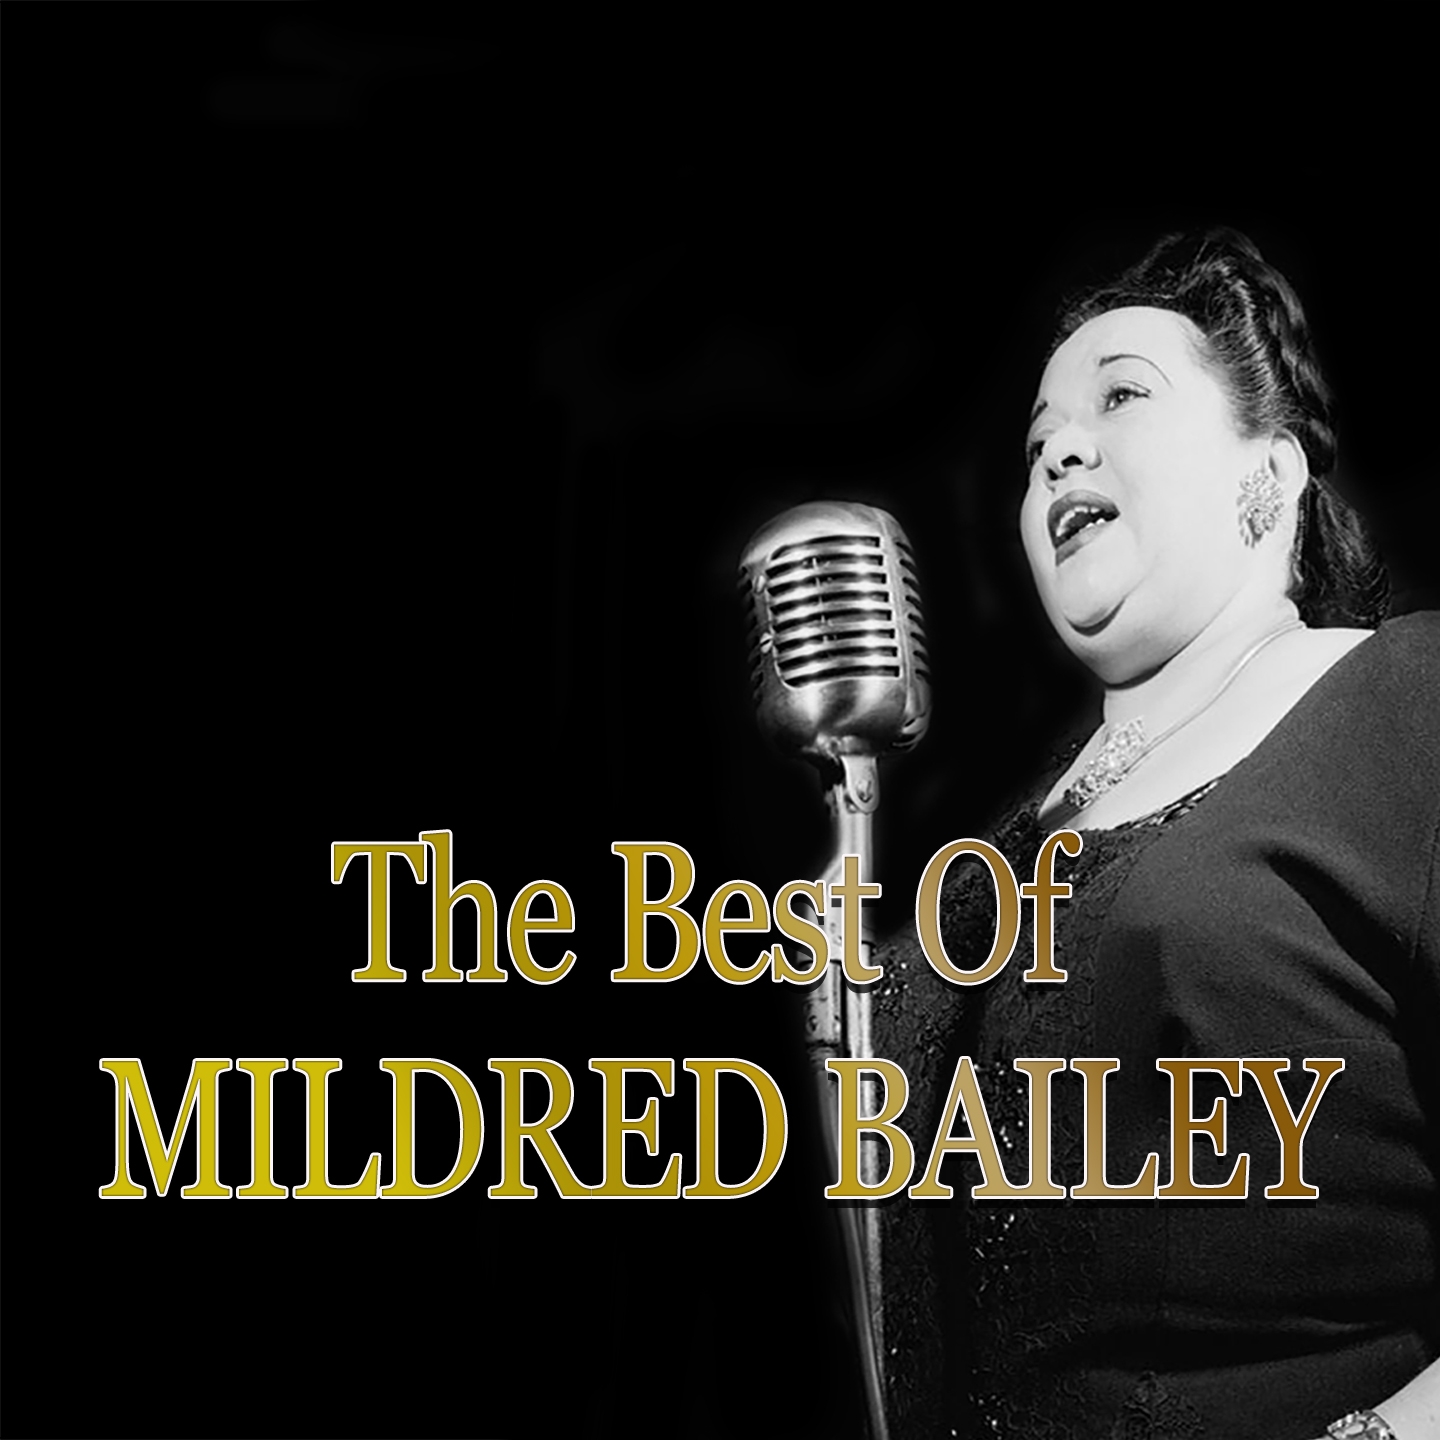 The Best of Mildred Bailey